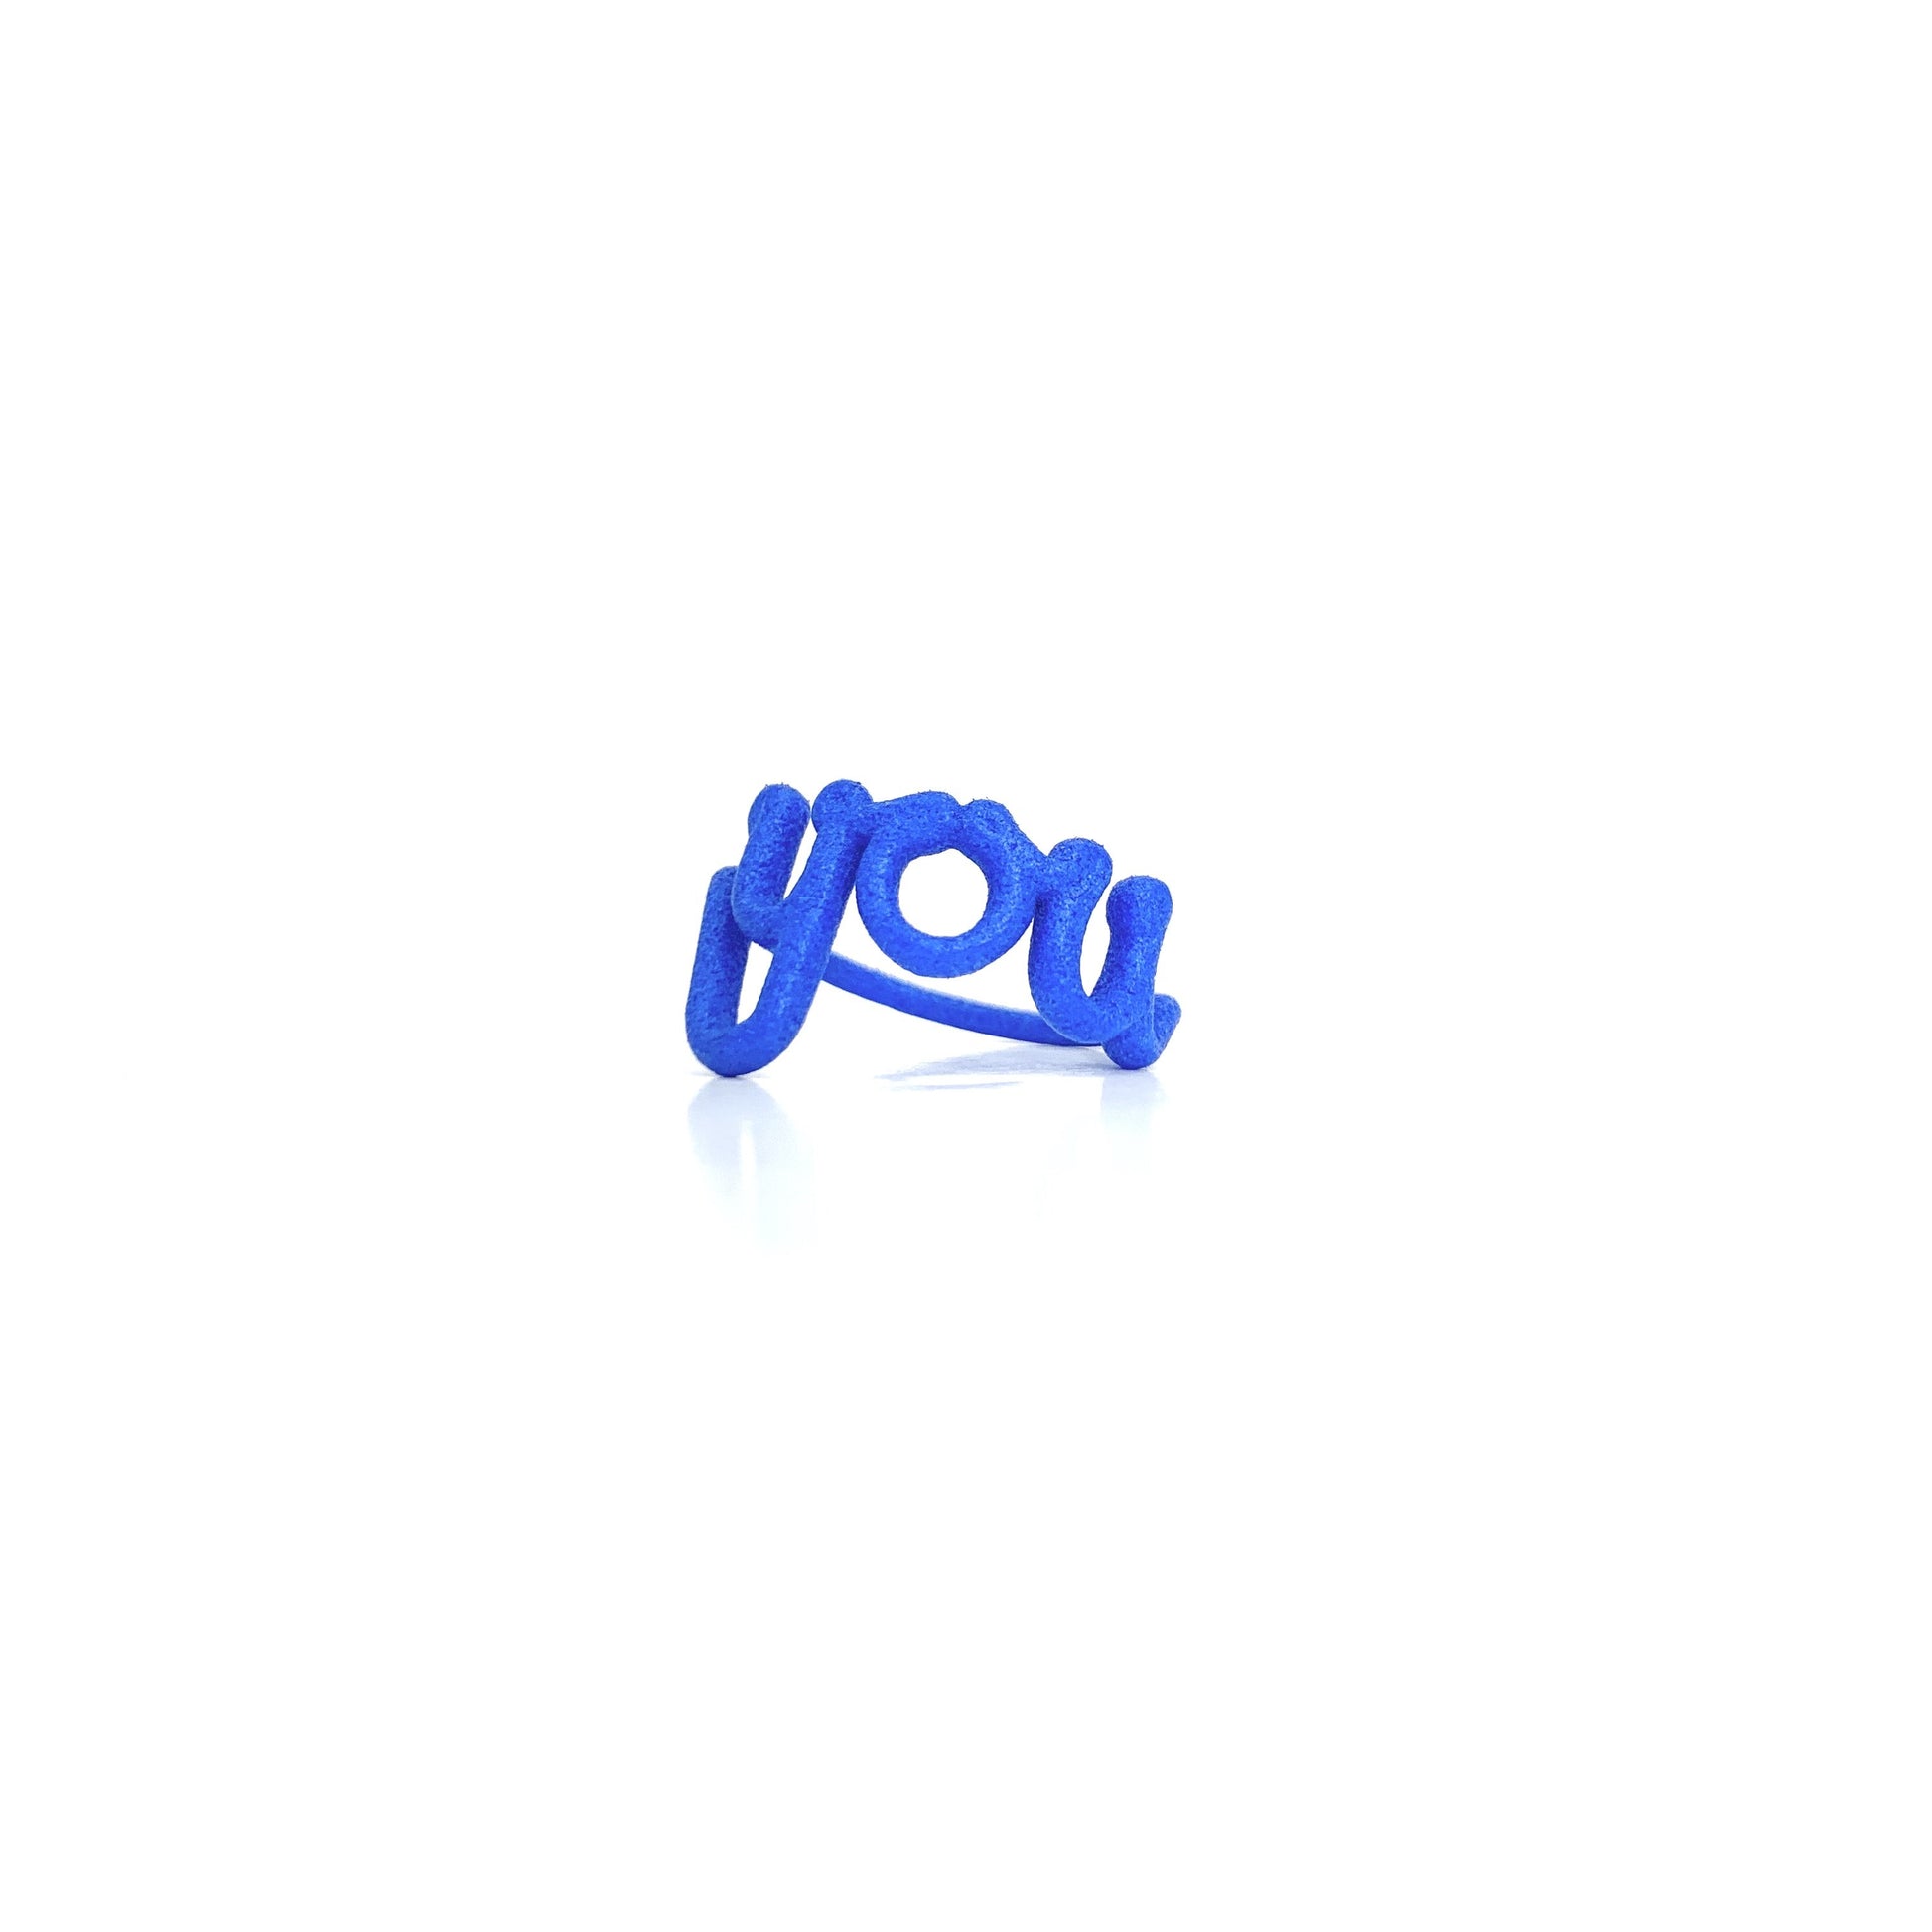 Zoe sherwood The Original This Is ‘You’ Statement Ring blue